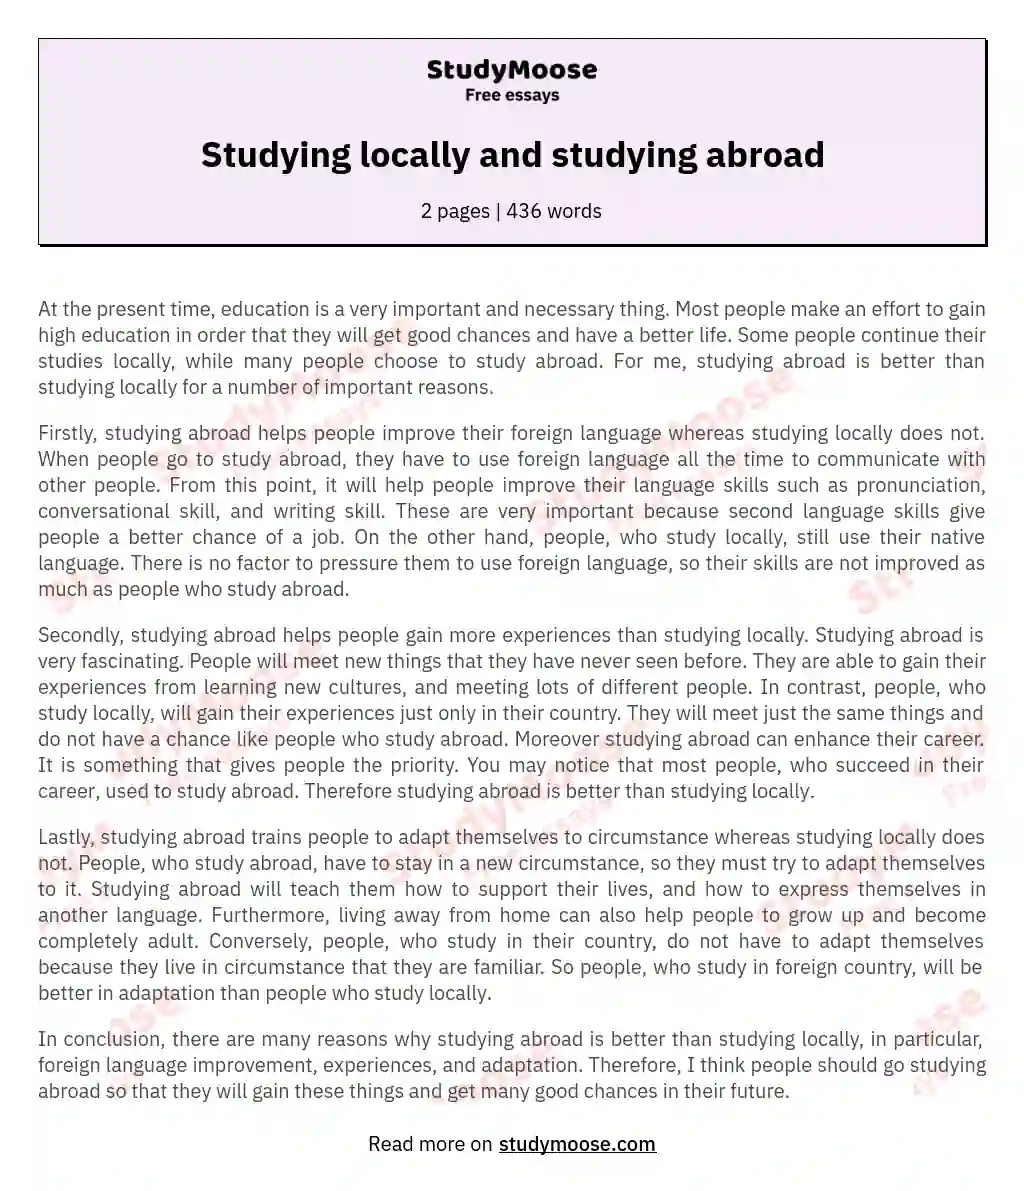 Studying locally and studying abroad essay